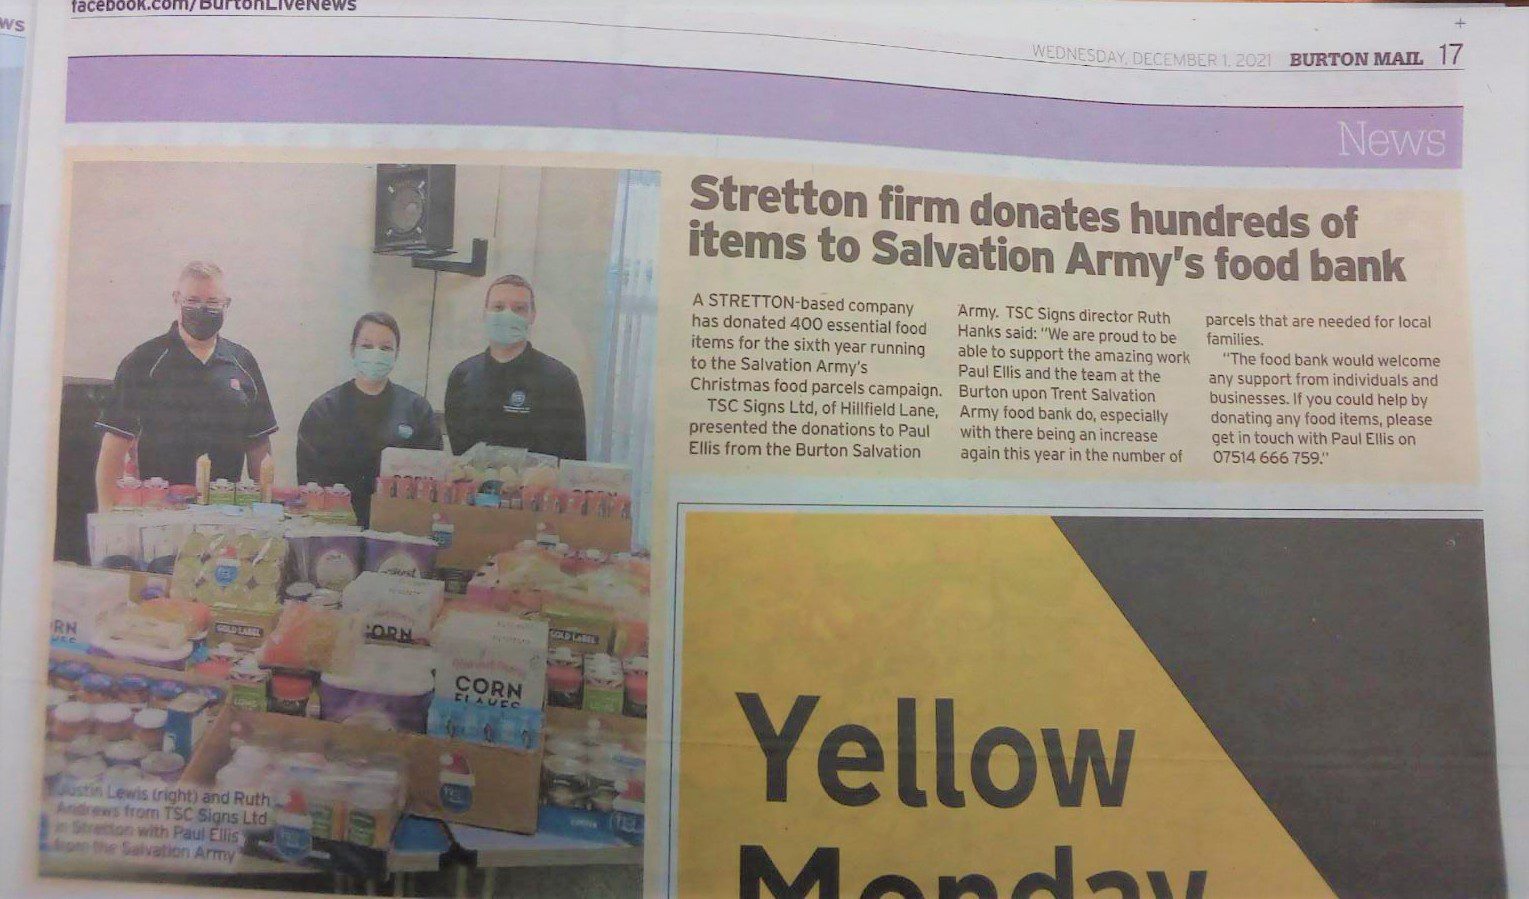 Extract from Burton Mail for foodbank donation